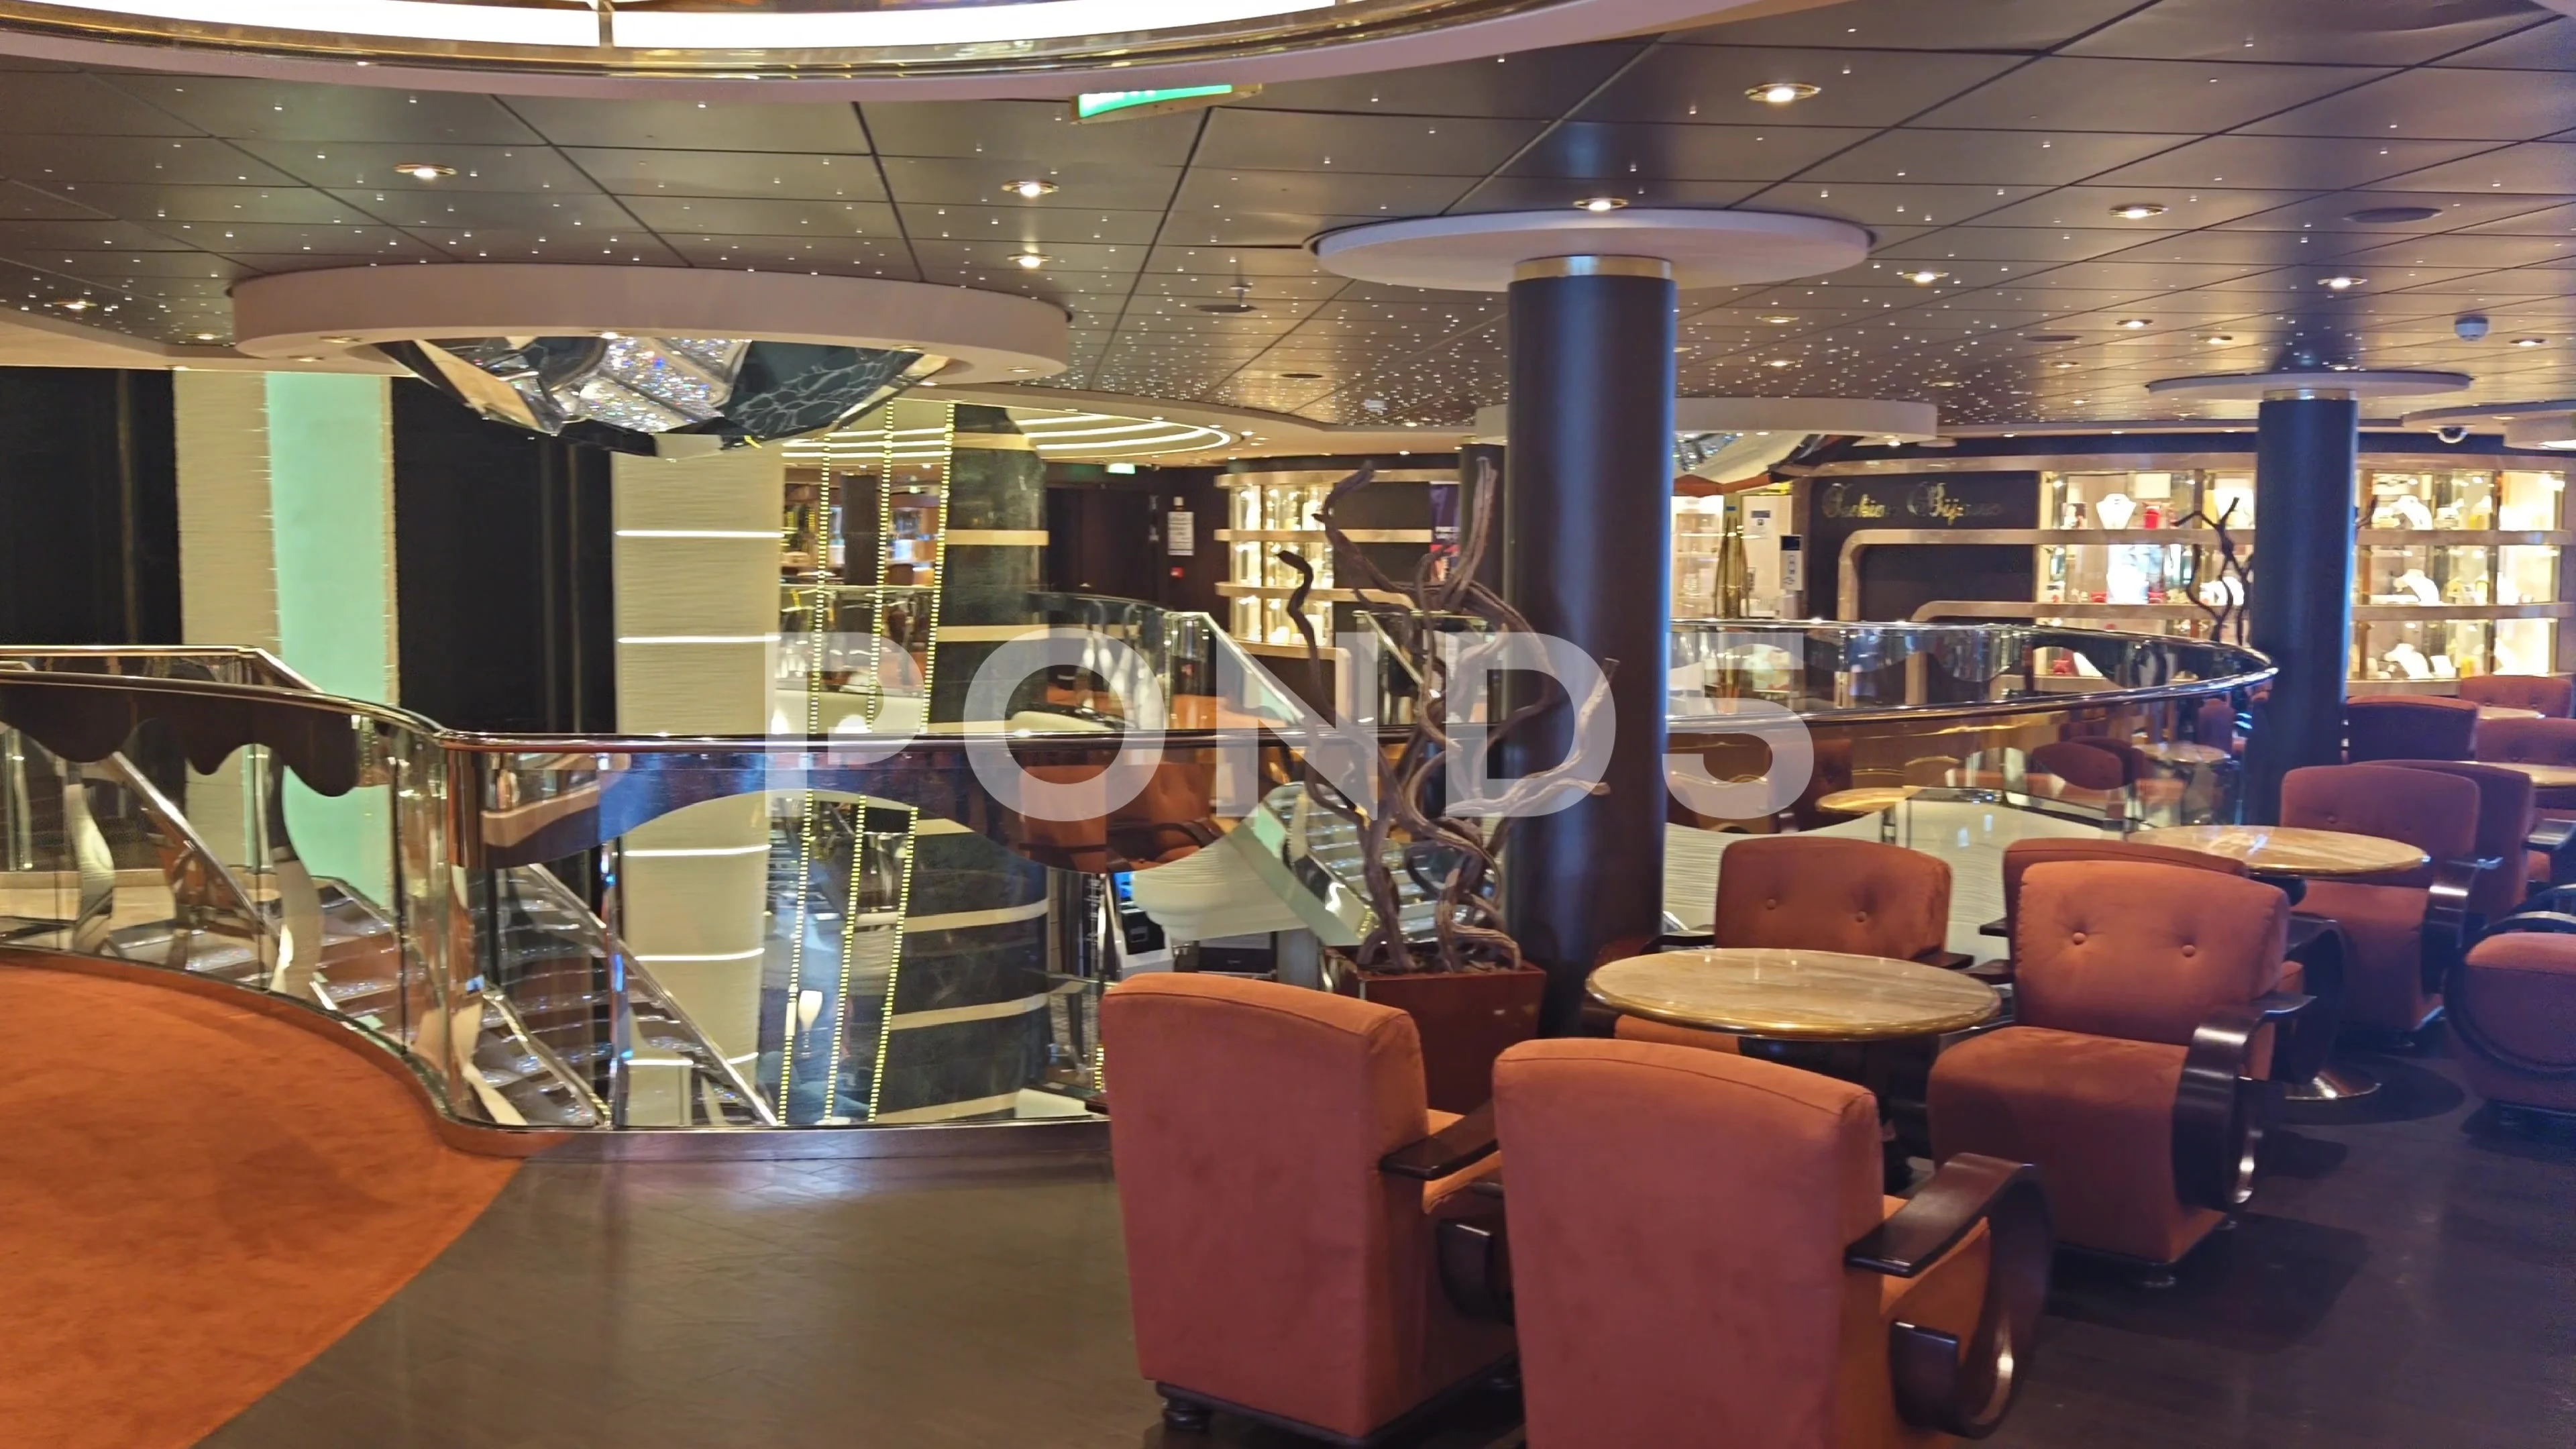 Cruise ship inside view. Shops and bar i, Stock Video